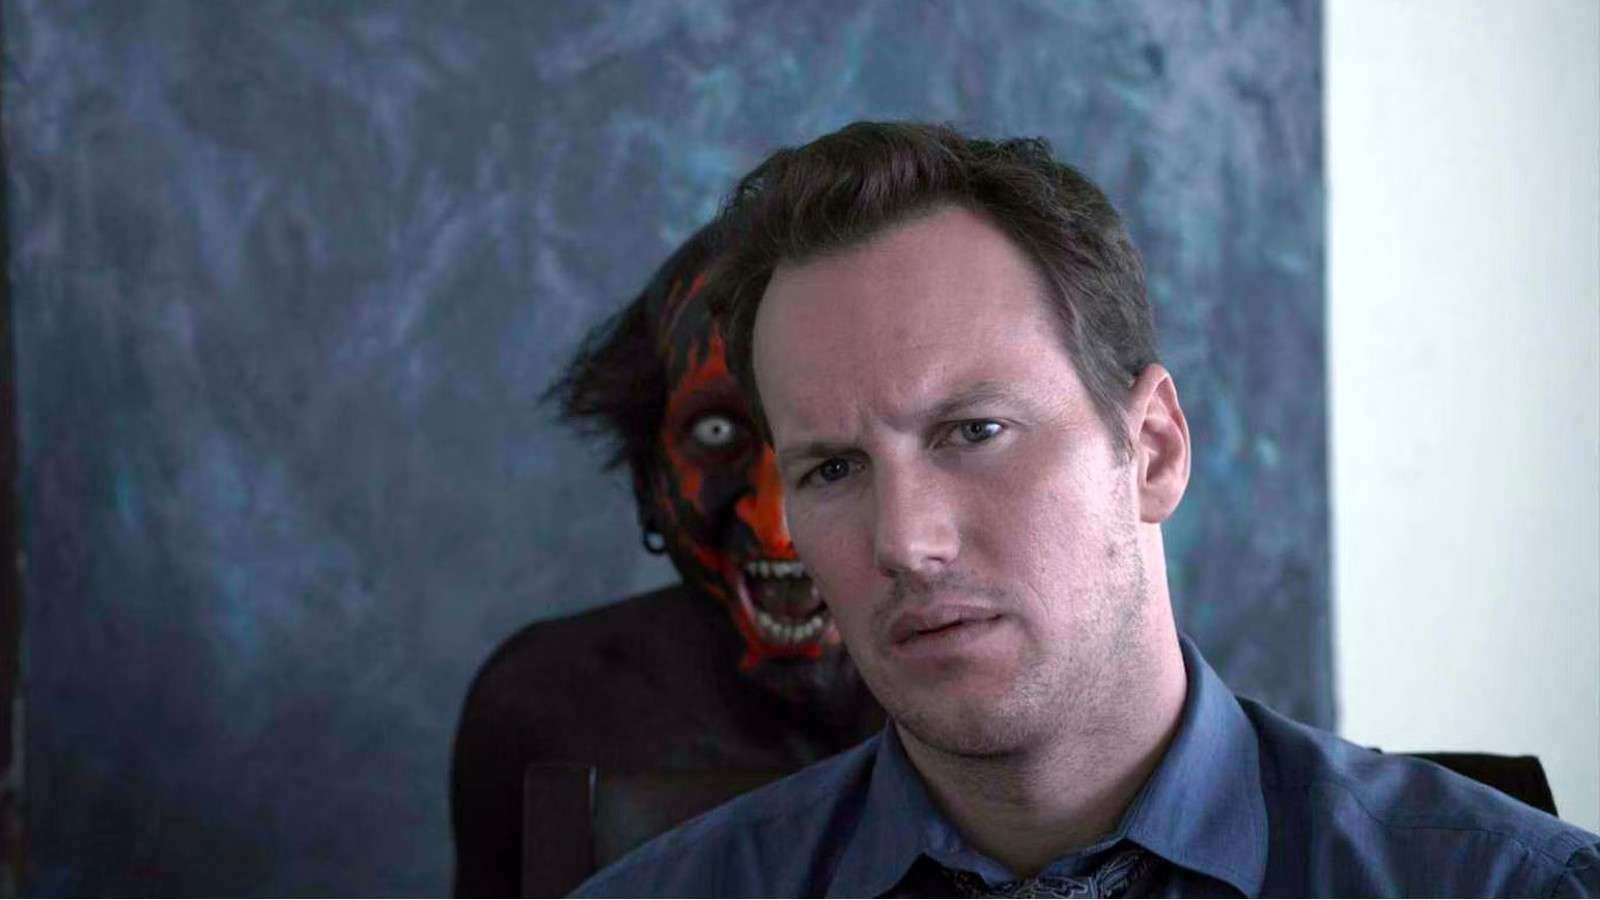 Patrick Wilson being haunted in Insidious.